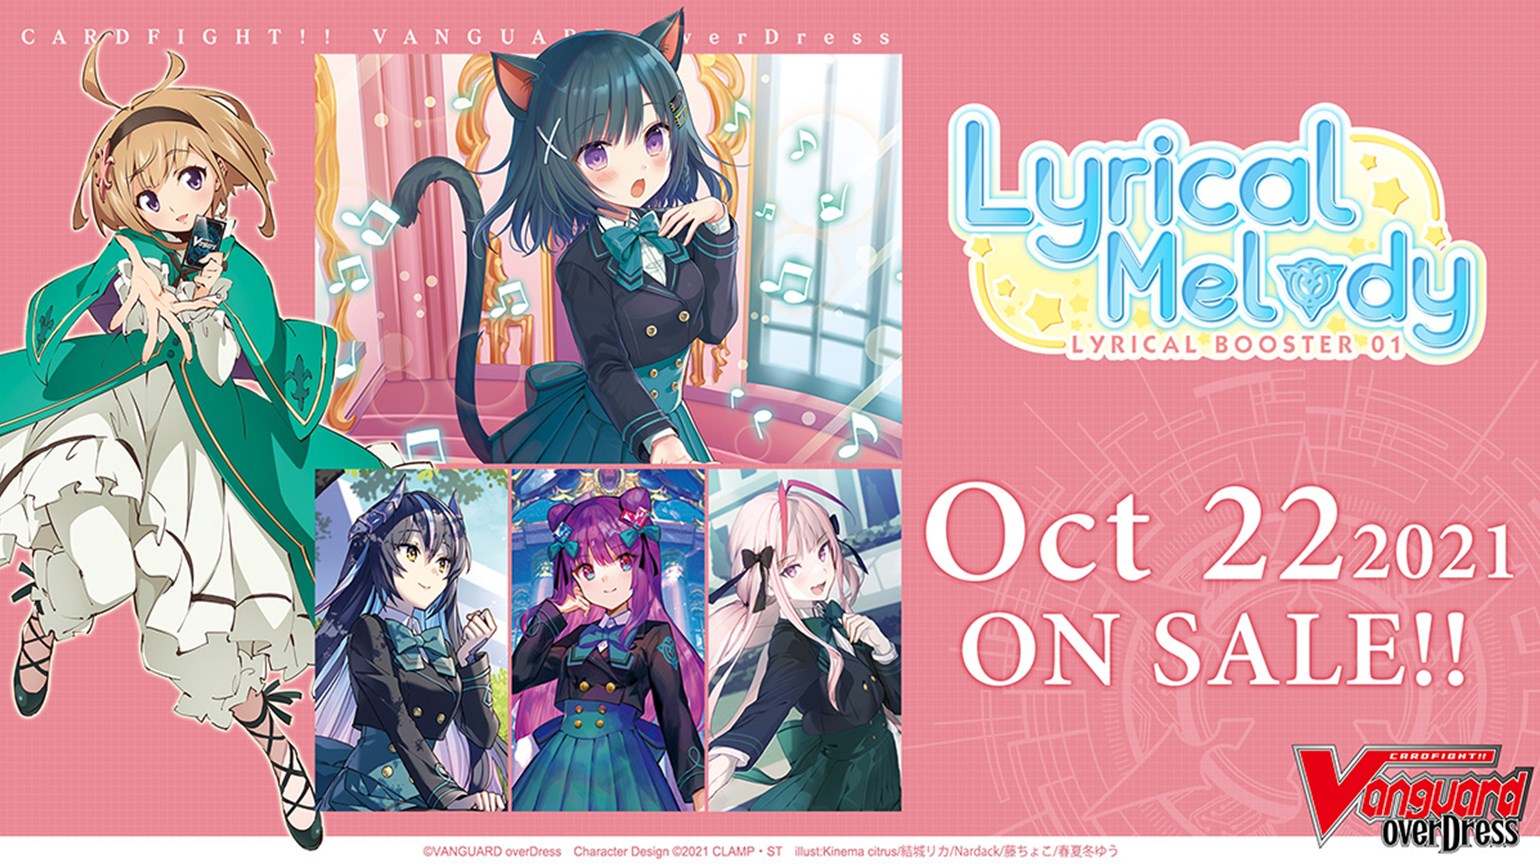 New English Edition overDress Lyrical Booster Pack 01: Lyrical Melody, Coming to Stores on October 22nd!